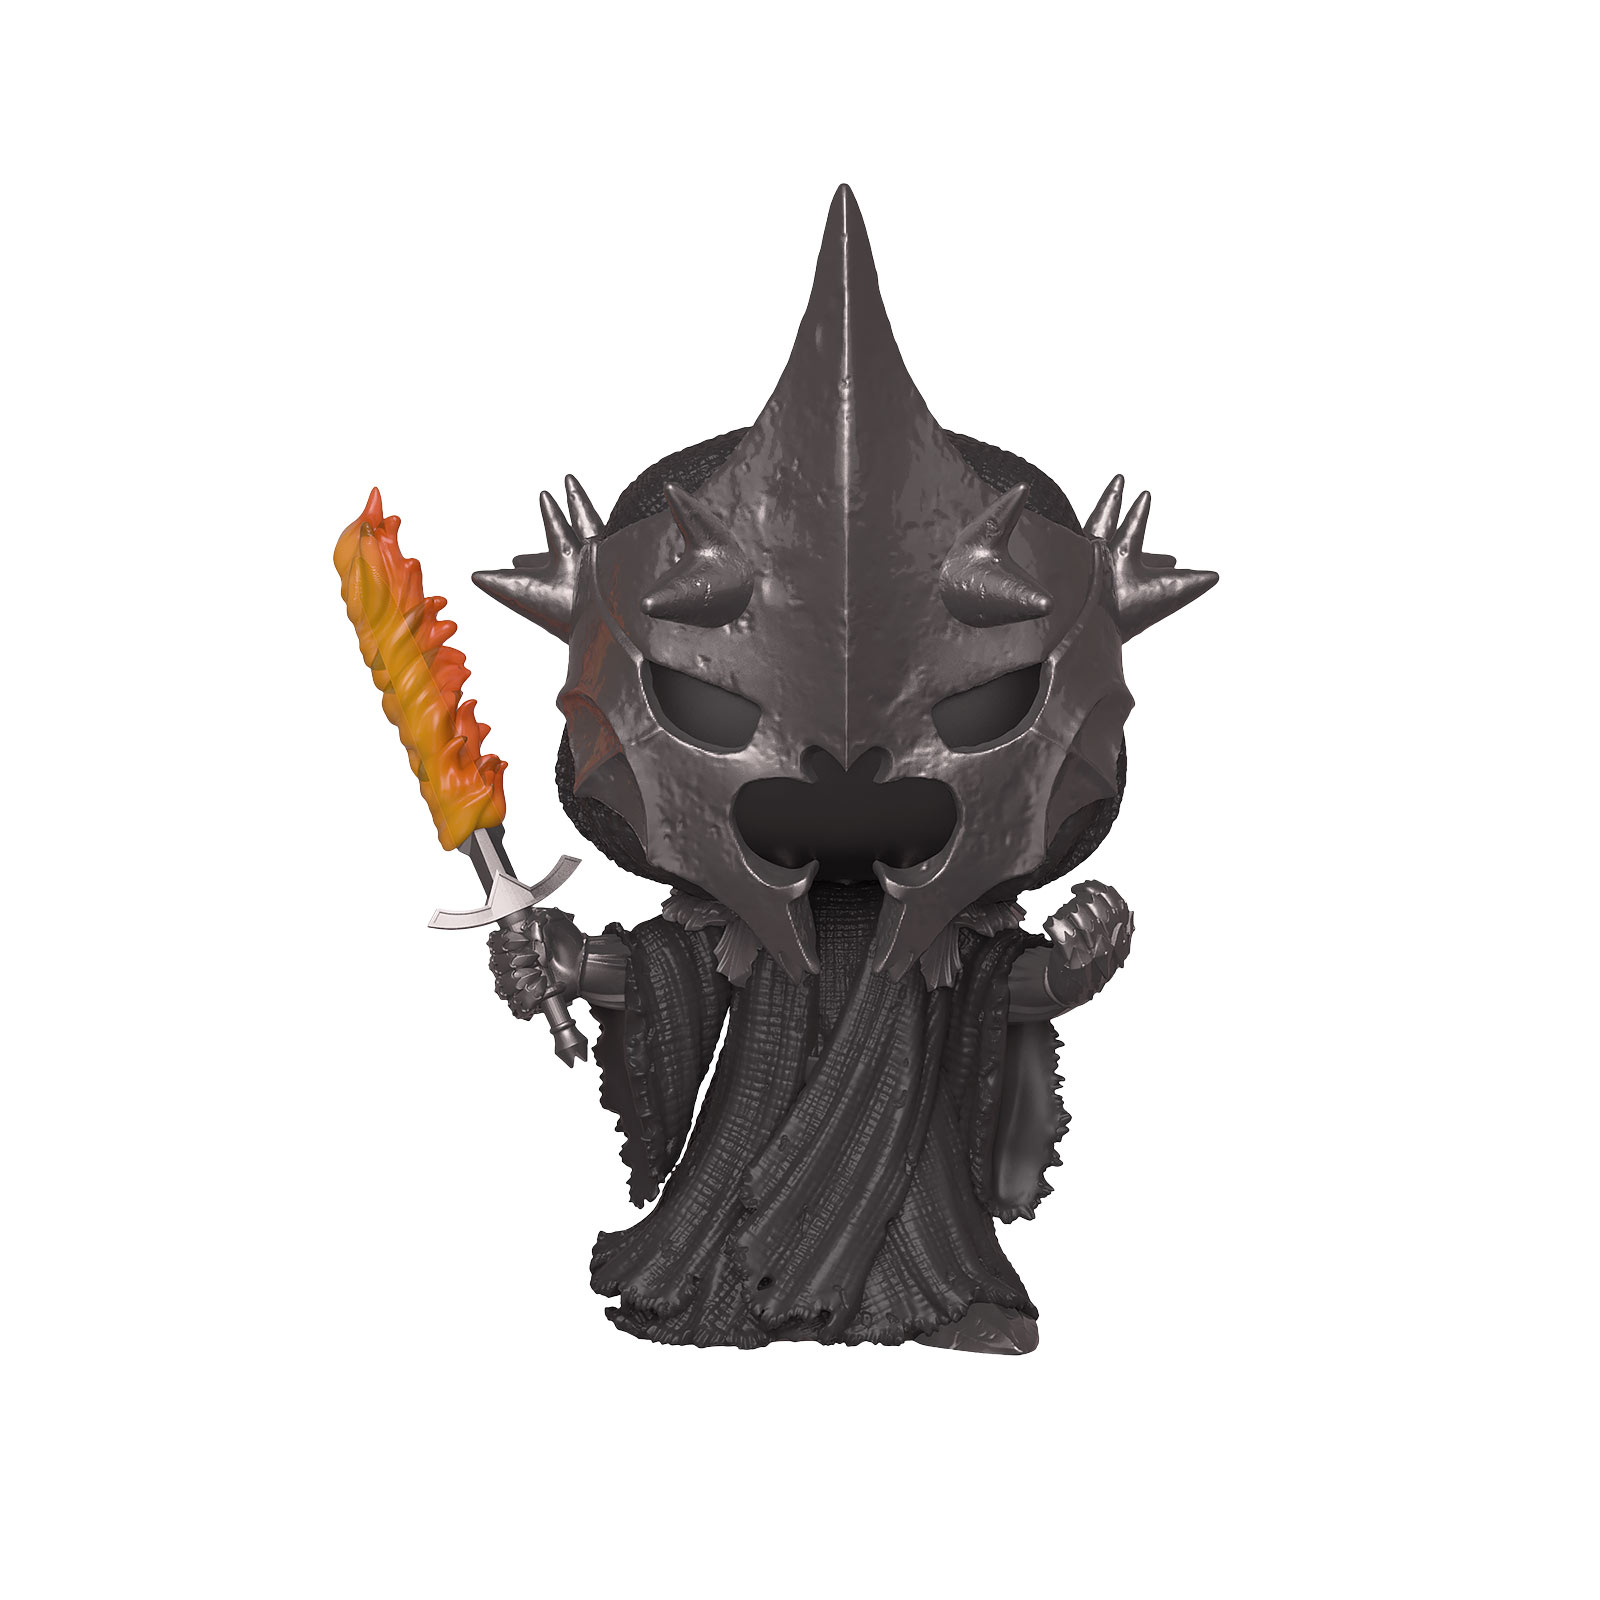 Lord of the Rings - Witch King of Angmar Funko Pop Figurine